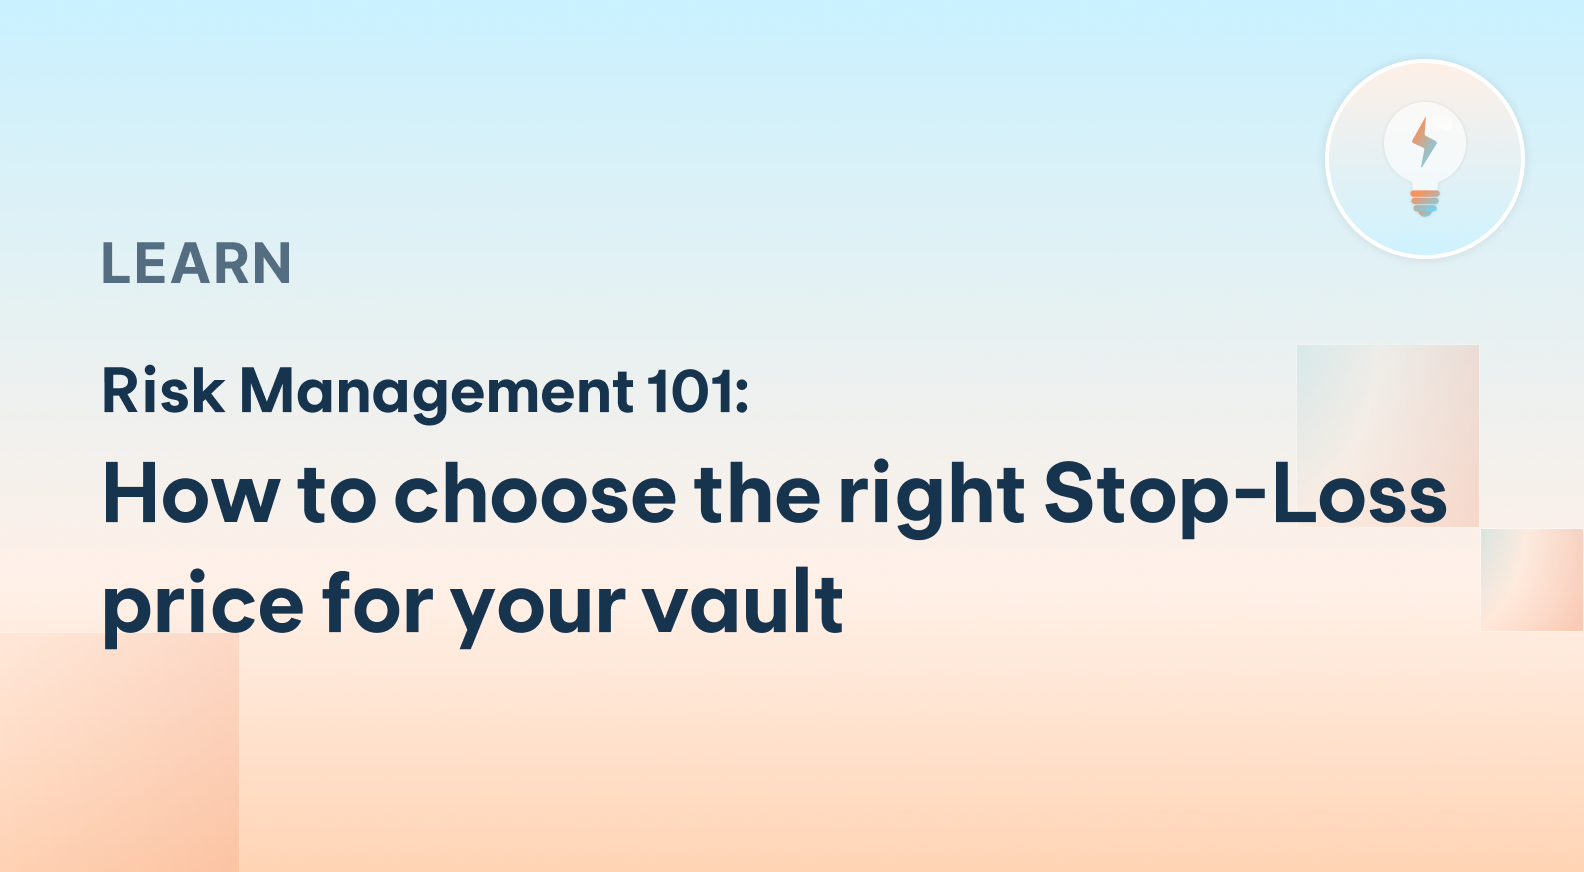 Risk Management 101: How to choose the right Stop-Loss price for your vault